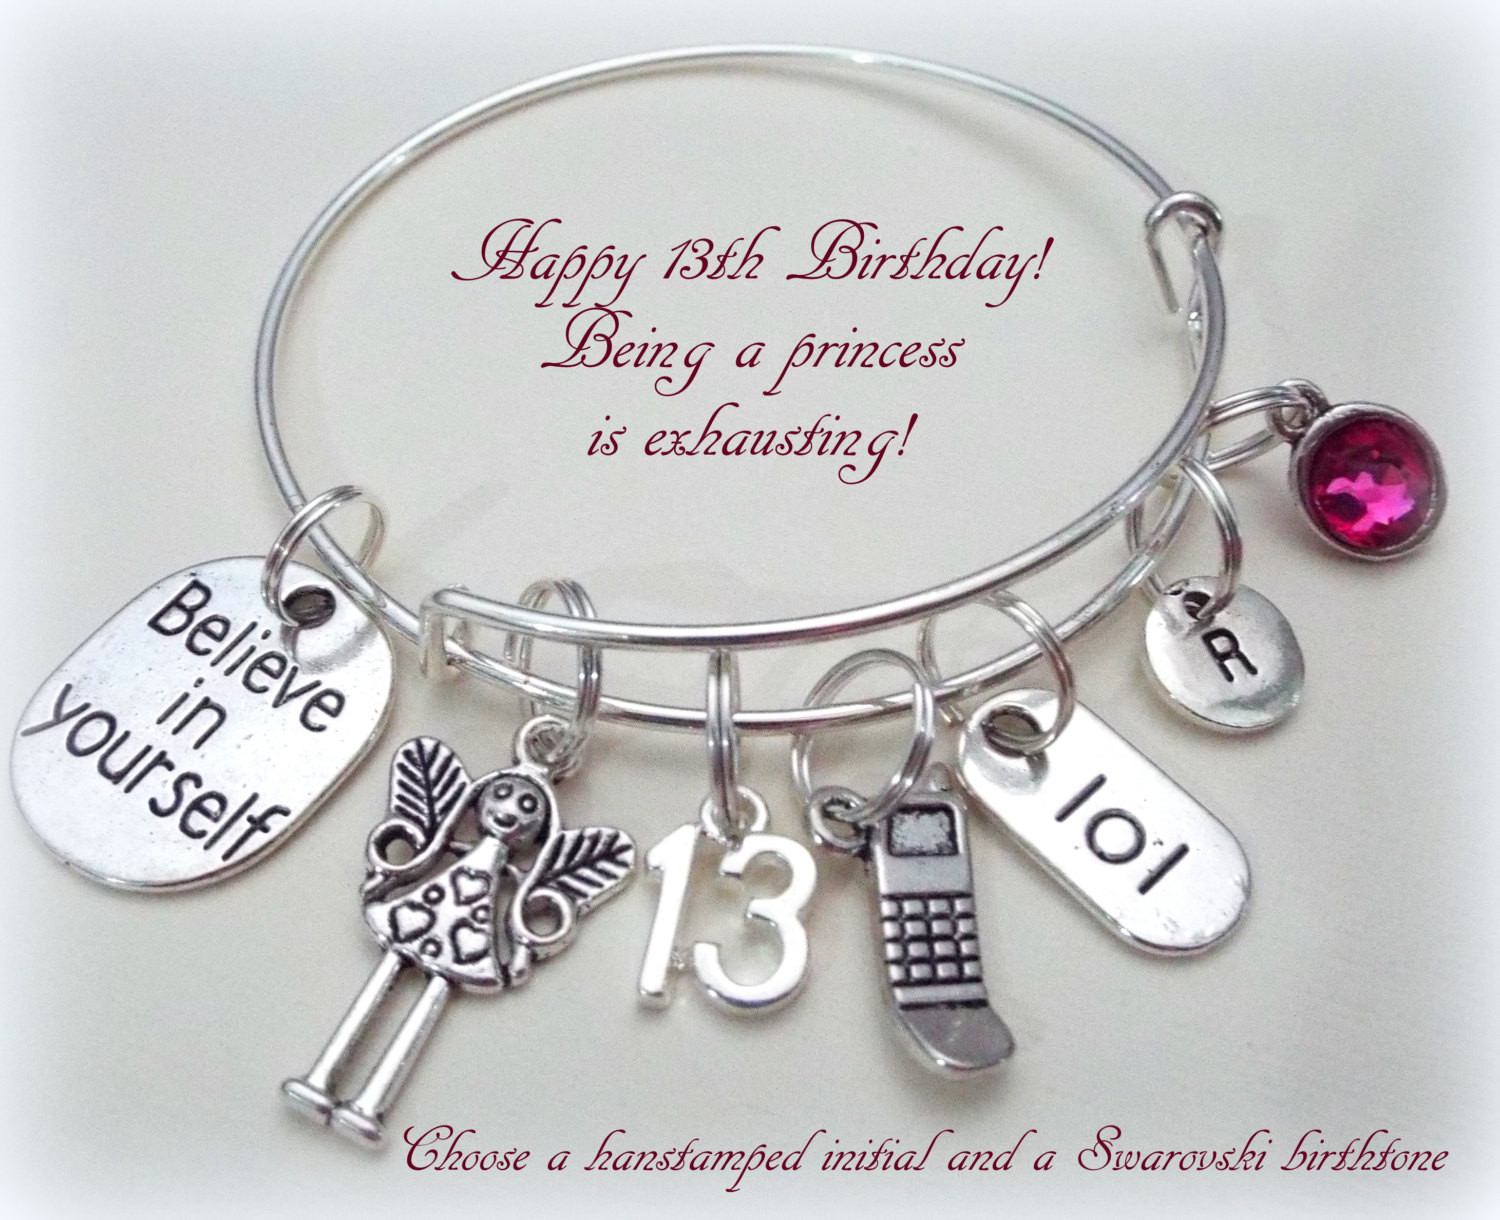 13Th Birthday Gift Ideas For Daughter
 13th Birthday Gift 13th Birthday Charm Bracelet Daughter